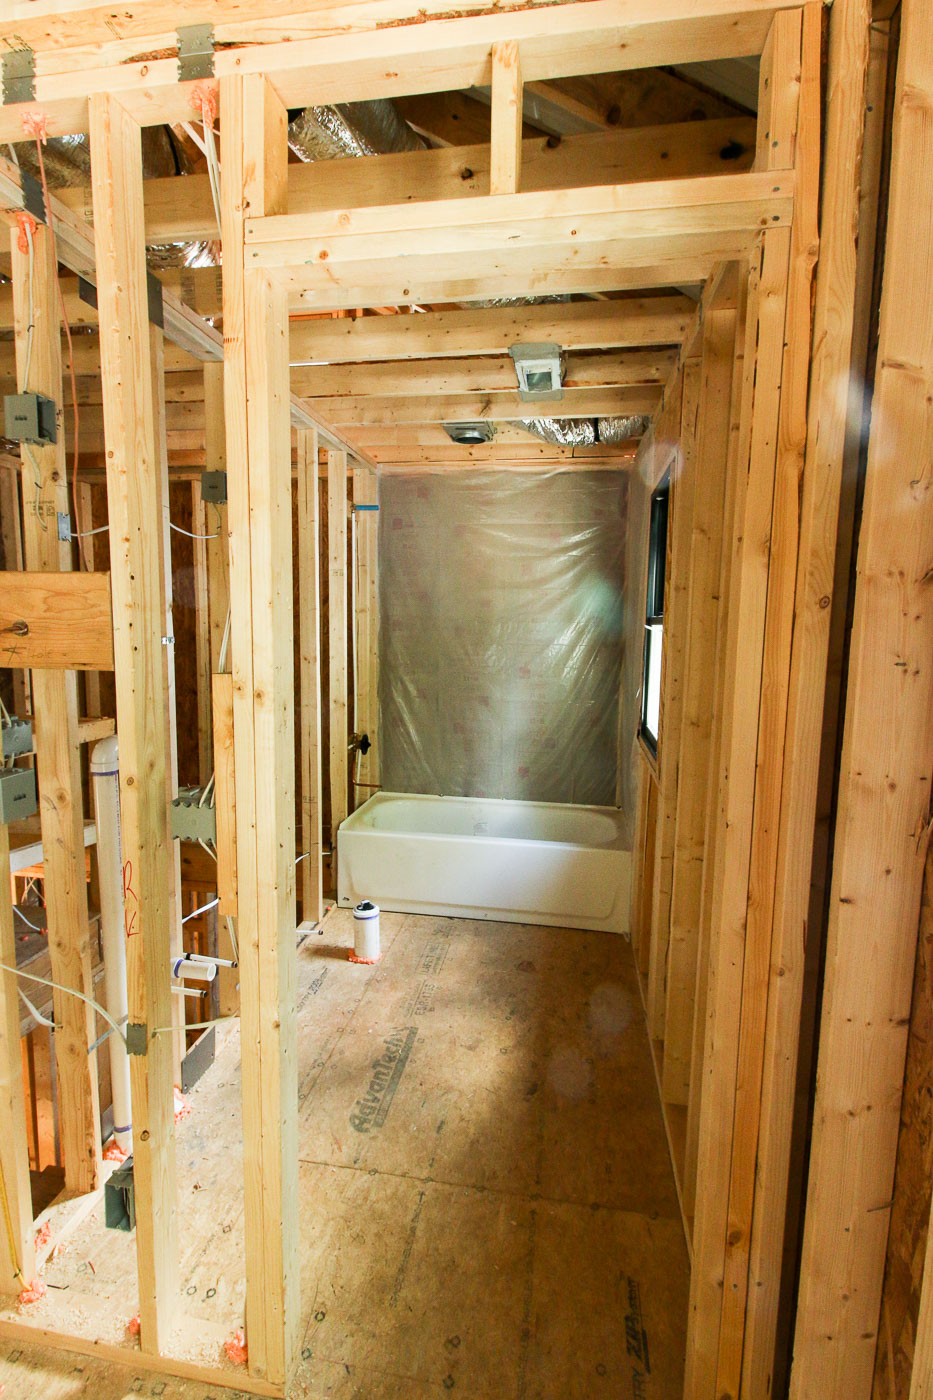 Upstairs Bathroom Framing and tub in